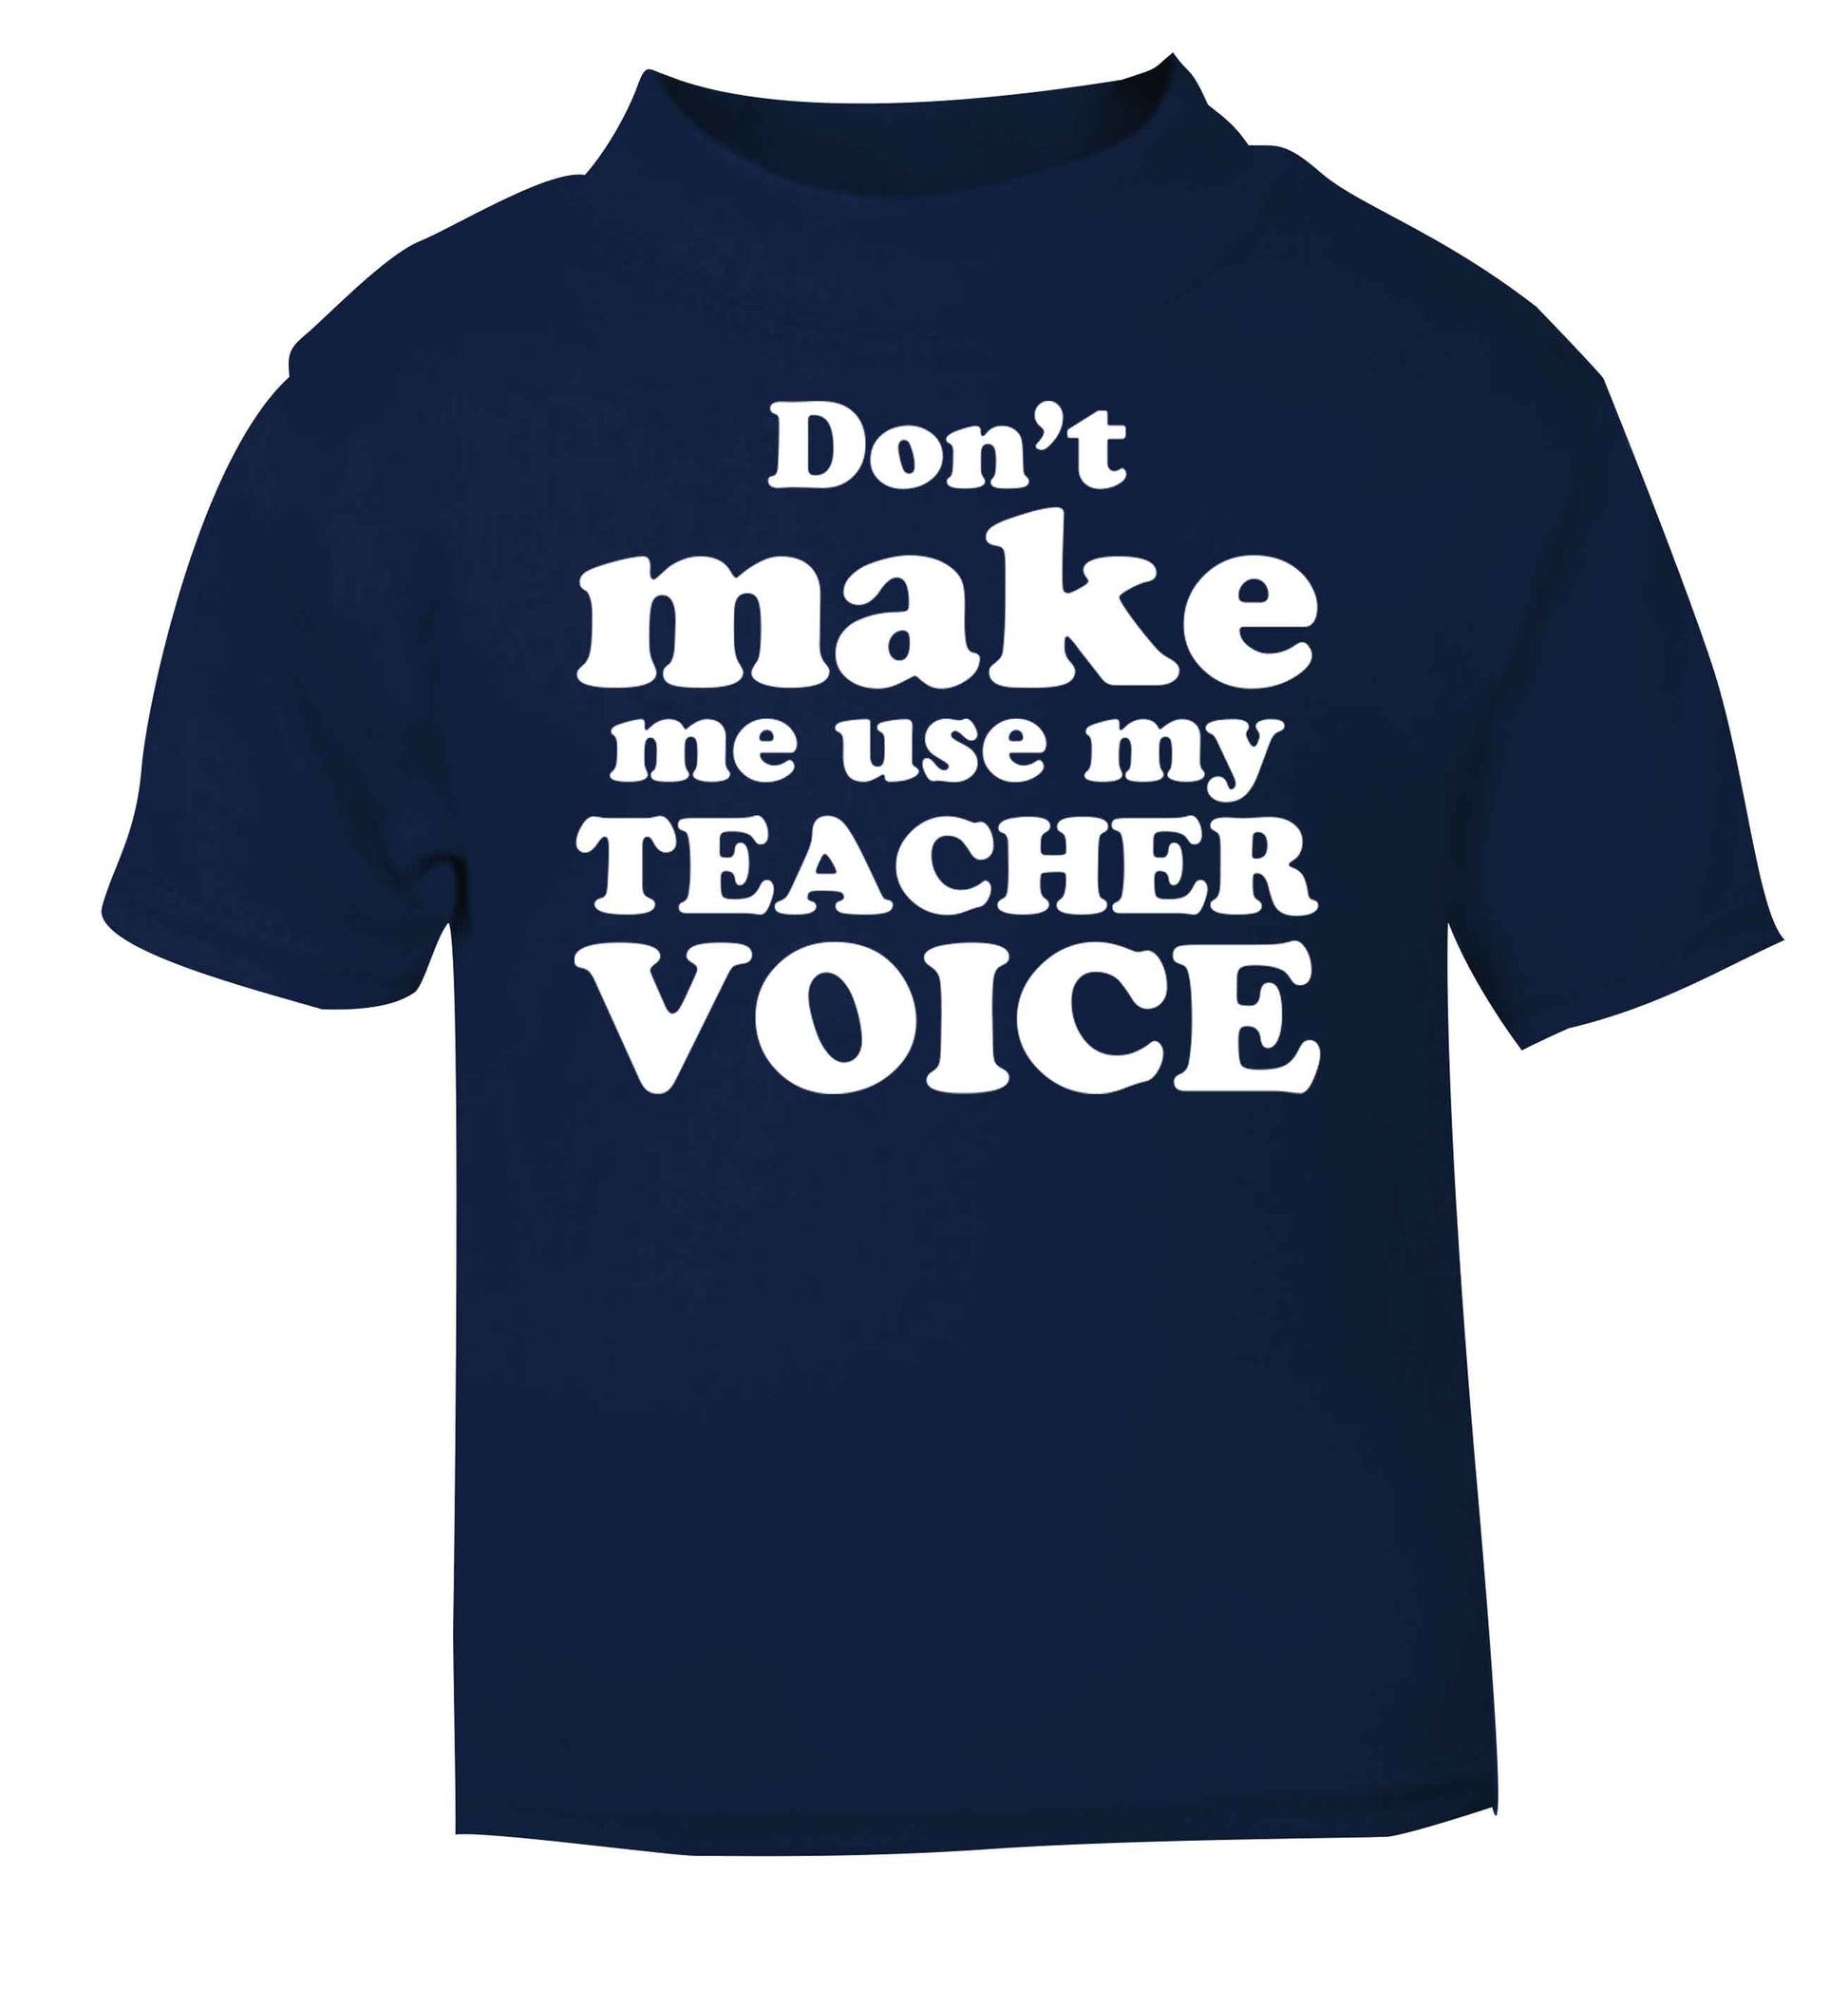 Don't make me use my teacher voice navy baby toddler Tshirt 2 Years